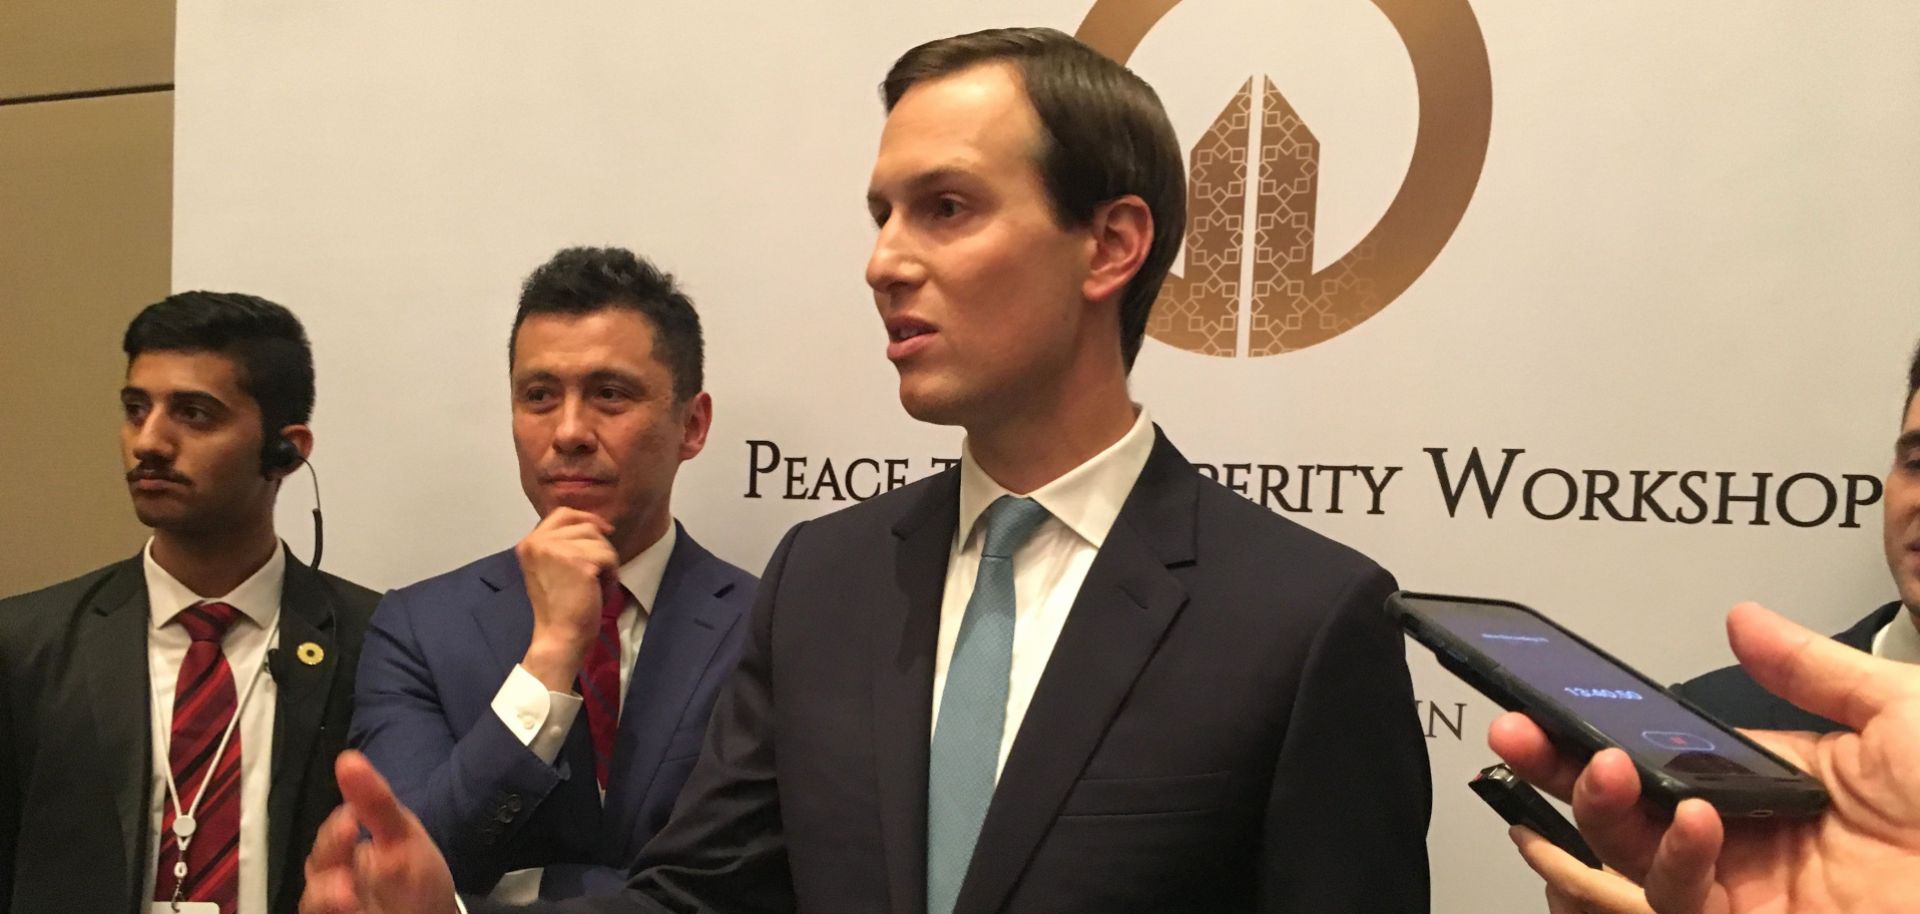 Jared Kushner, President Donald Trump's son-in-law and adviser, discusses the U.S.-sponsored Middle East "Peace to Prosperity Workshop" with reporters in the Bahraini capital of Manama on June 26, 2019.